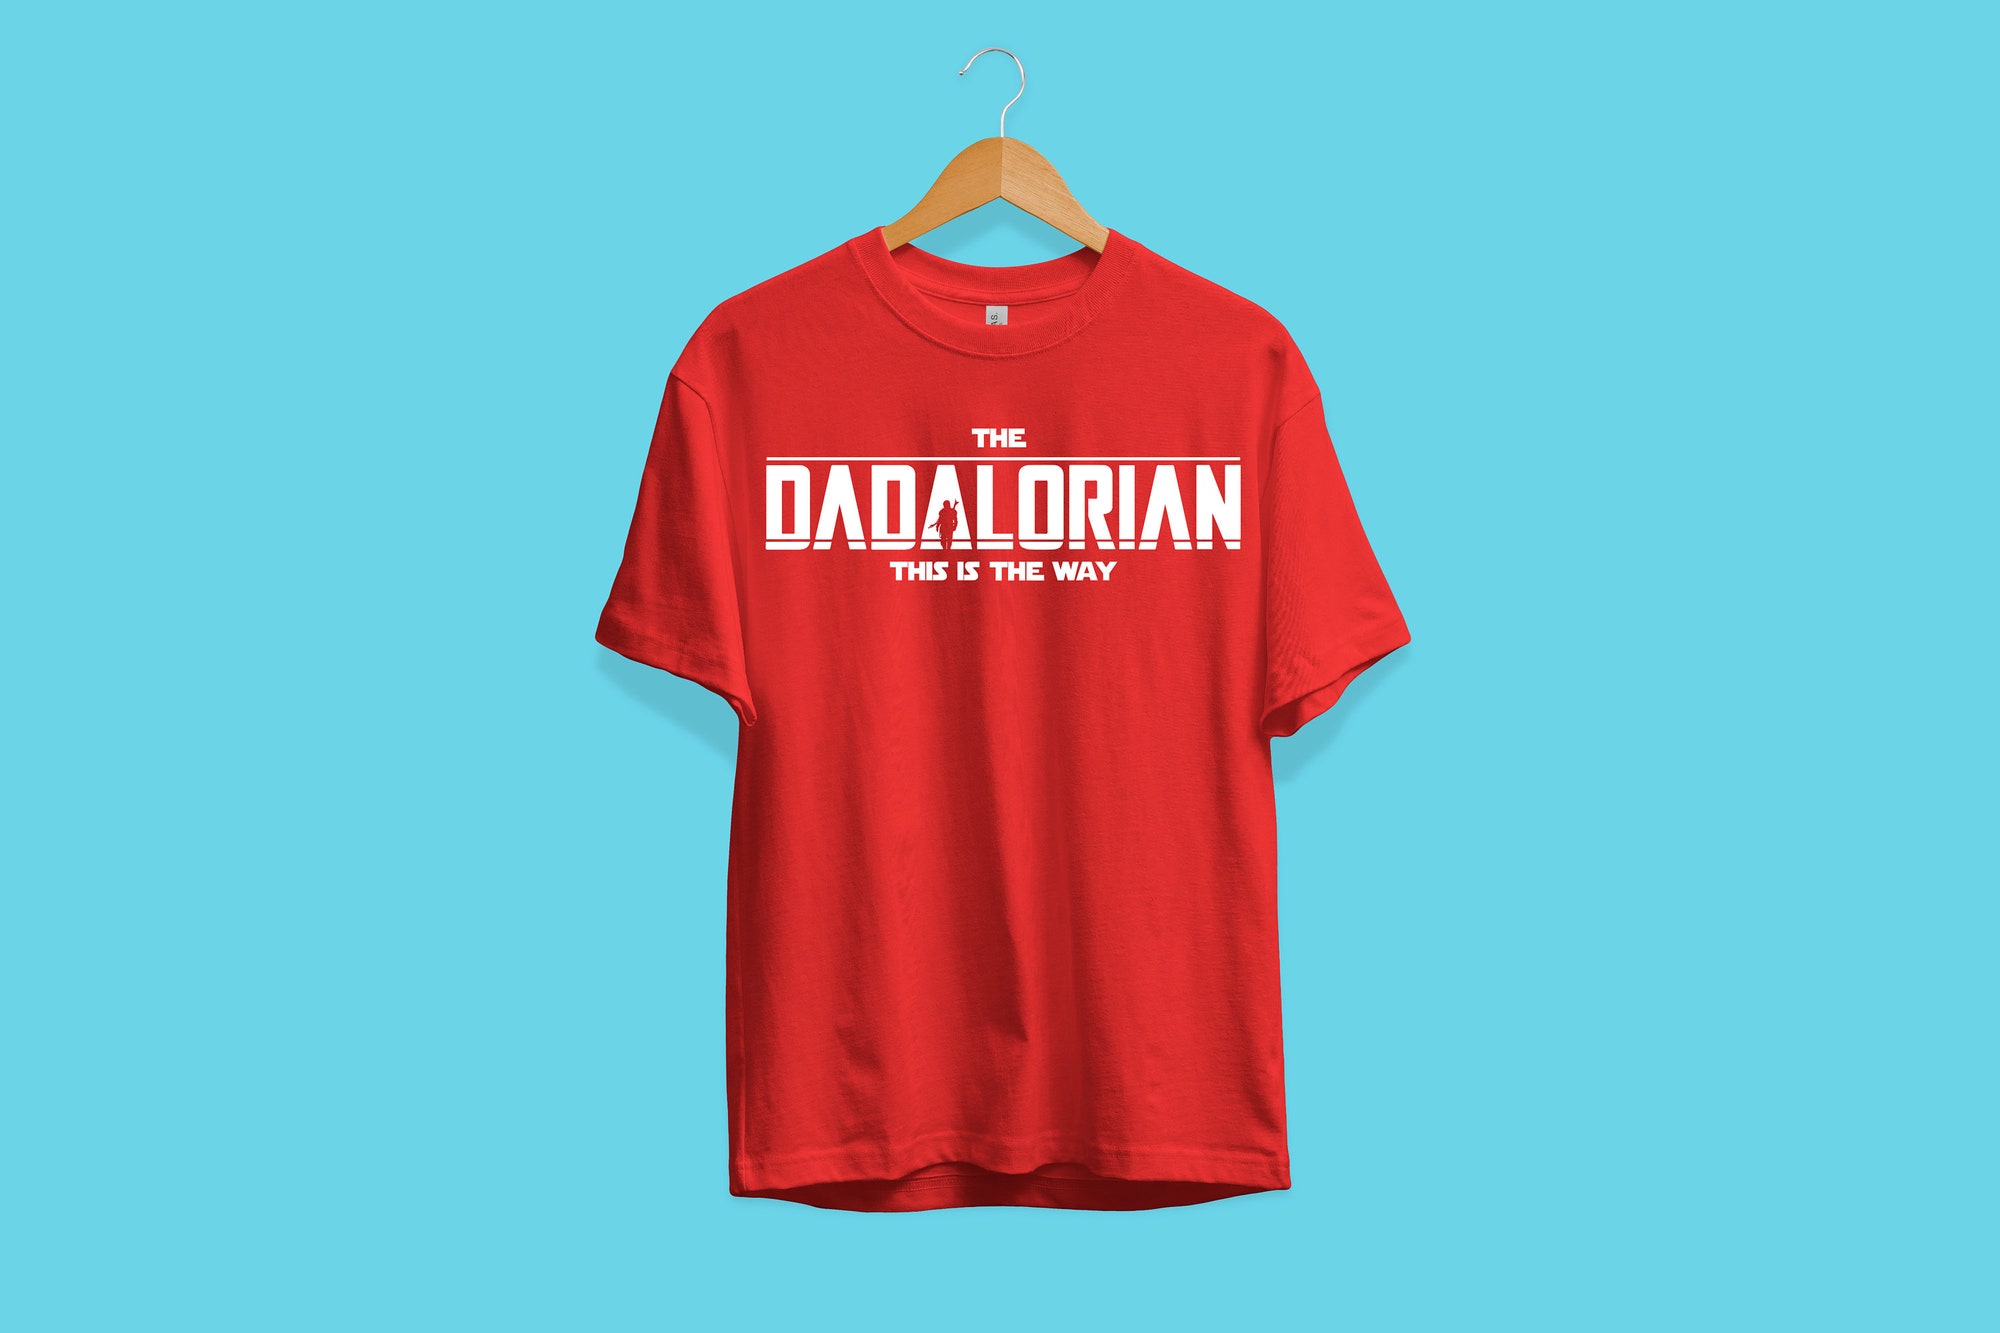 Discover The Dadalorian - Fathers day T-shirt - Inspired by The Madalorian